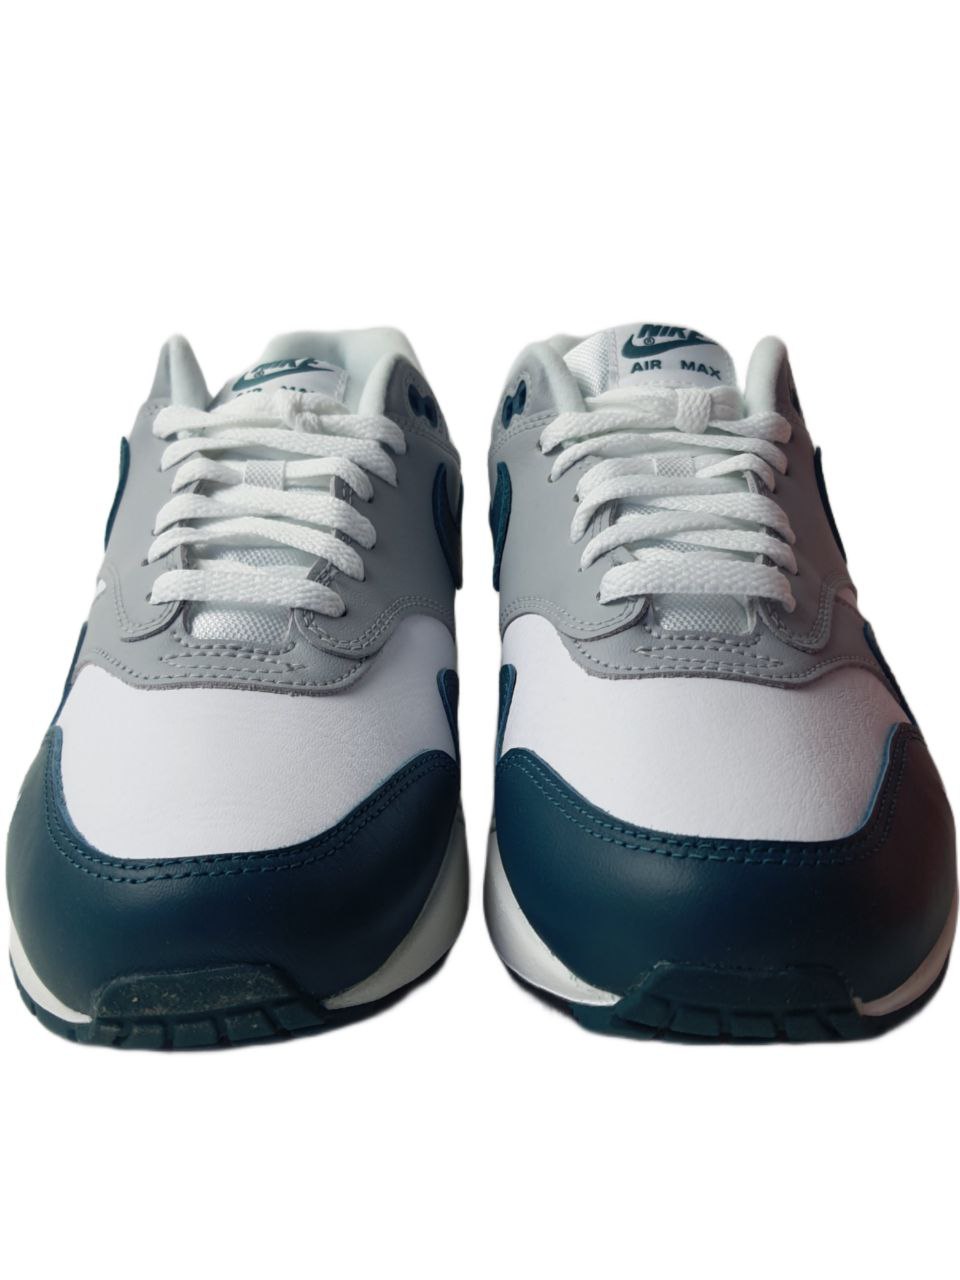 Nike Air Max 1 Lv8 Wolf Grey in Gray